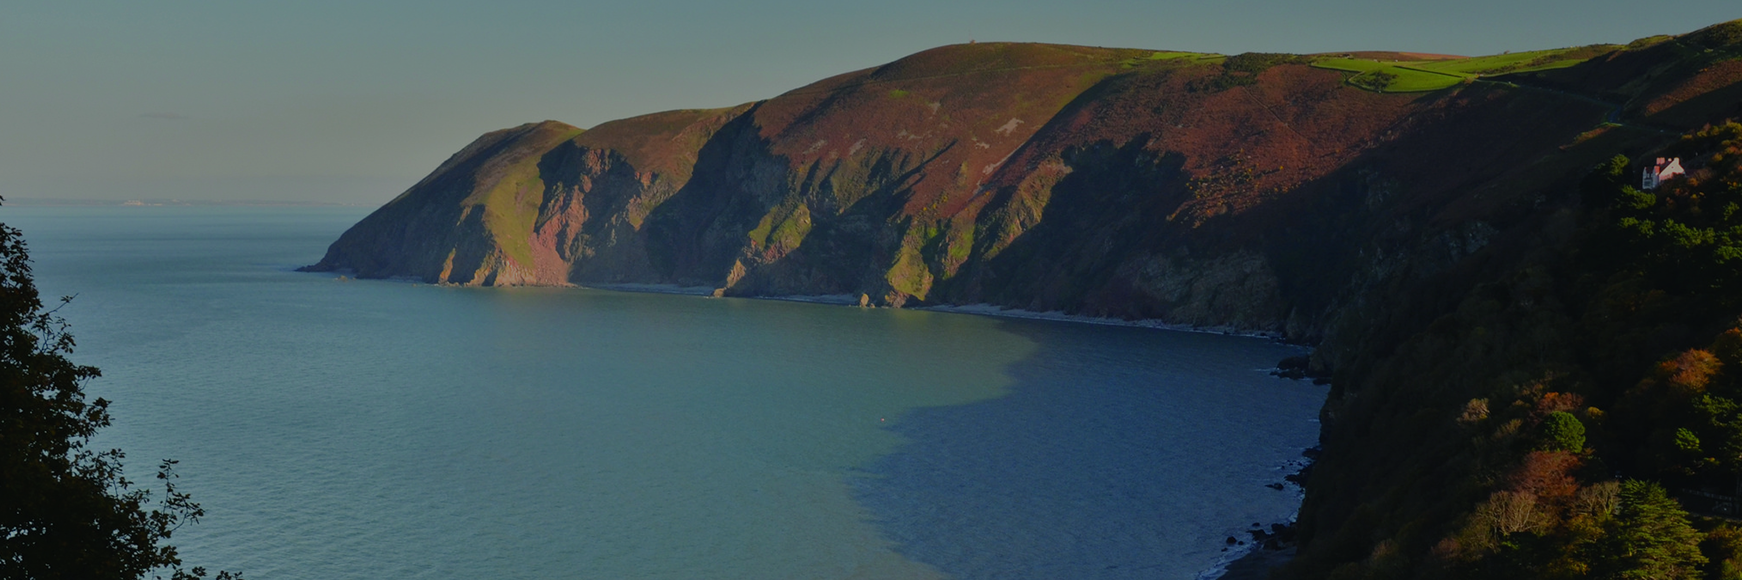 The best bits of Exmoor National Park banner image